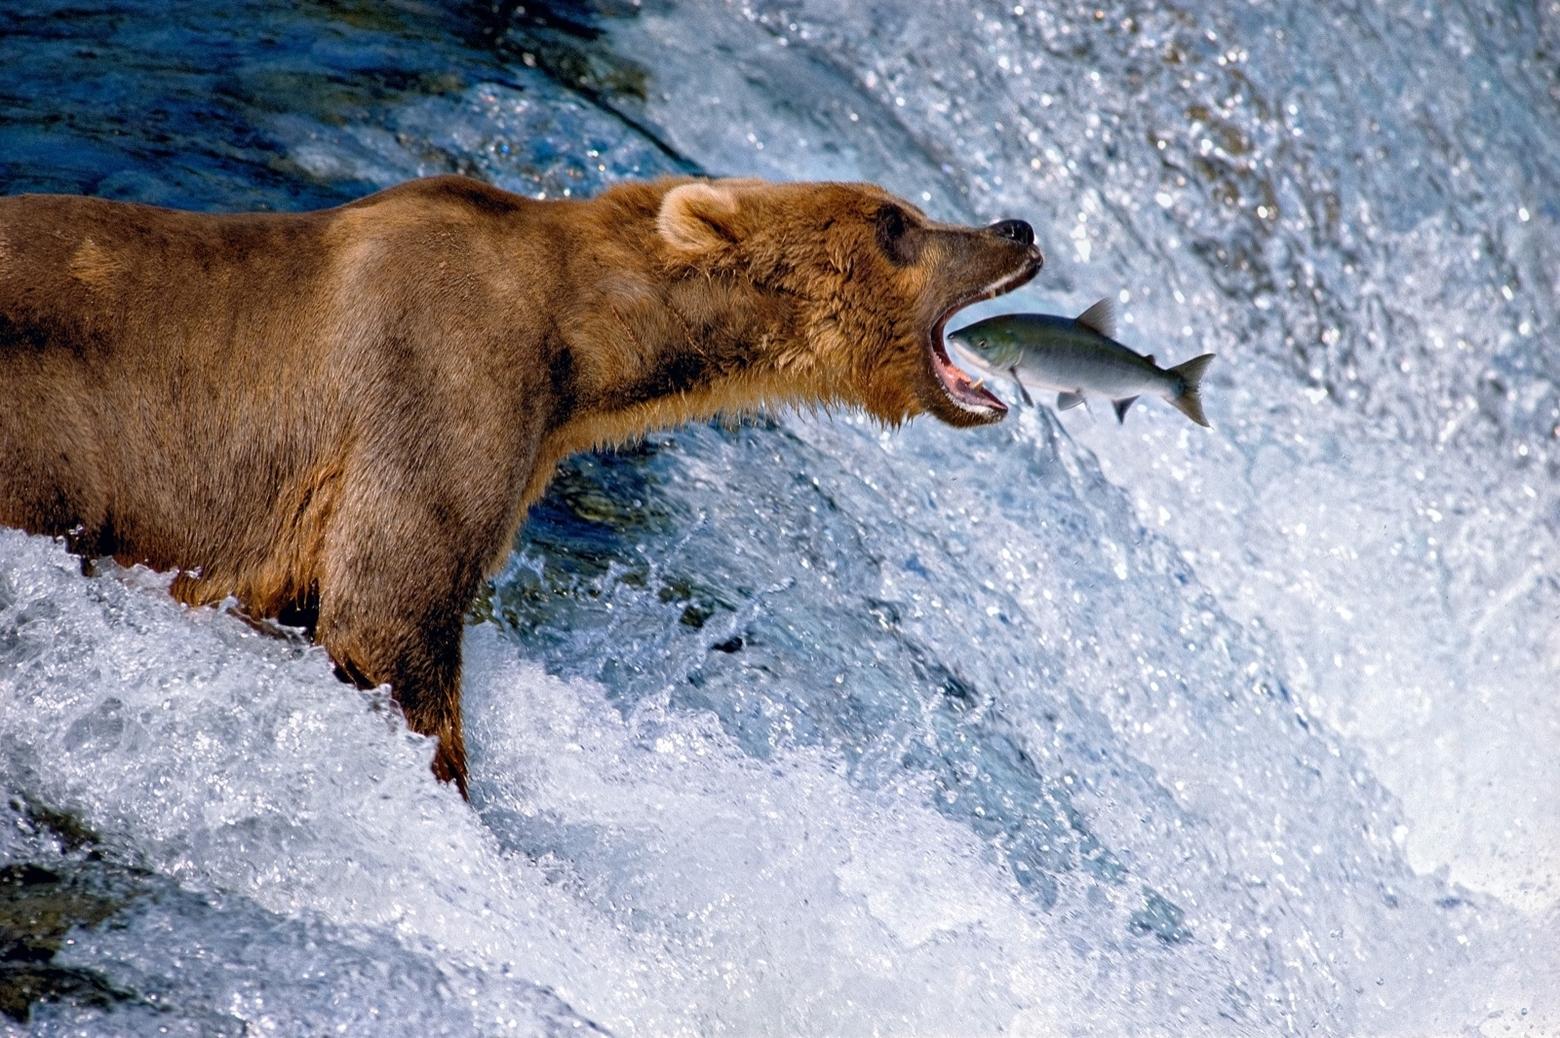 "Catch of the Day" by Thomas Mangelsen captures the moment that a spawning salmon in Alaska, leaping over the rapids, lands right in the jaws of an awaiting brown bear.  Produced long before the advent of Photoshop and digital technology, the image is one of the most famous wildlife photographs in modern times.  It is counted among Mangelsen's "legacy" images now on a national museum tour across the country.  Image courtesy Thomas D. Mangelsen